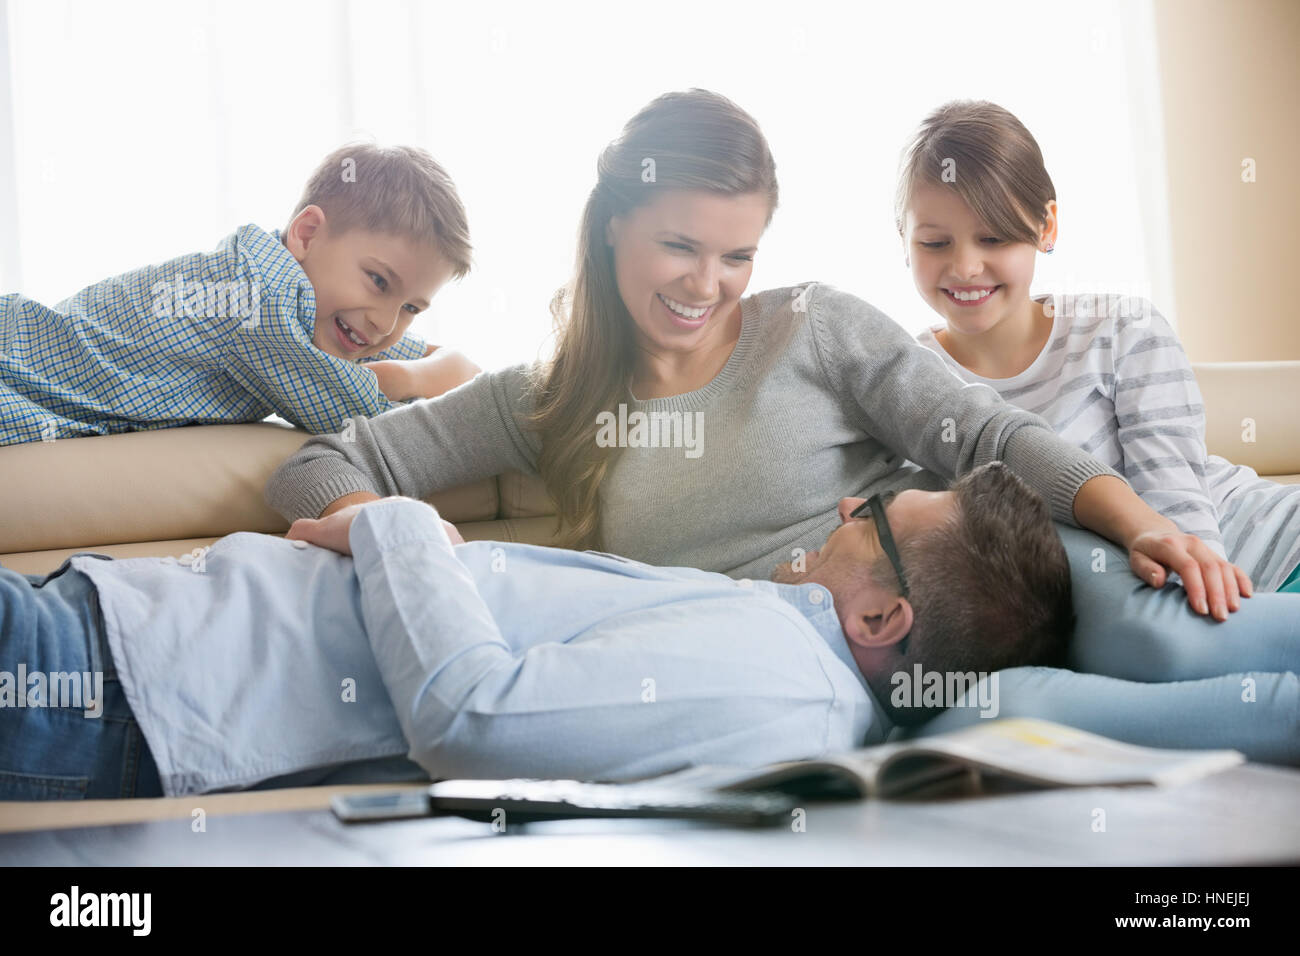 Happy Family in living room Banque D'Images